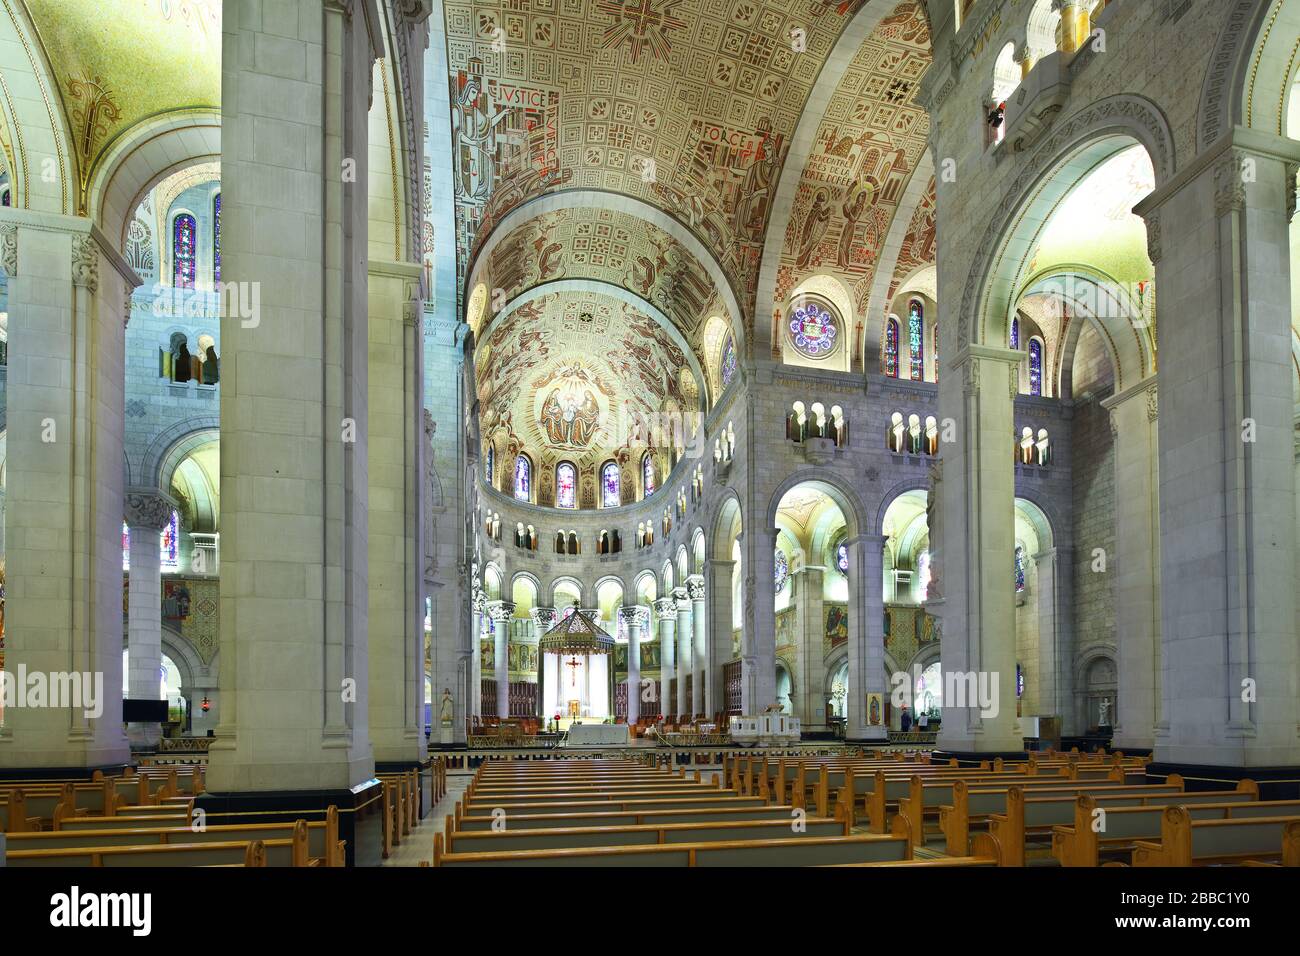 Nave and altar in the Basilica of Sainte-Anne-de-Beaupre, Sainte-Anne-de-Beaupre, Quebec, Canada Stock Photo